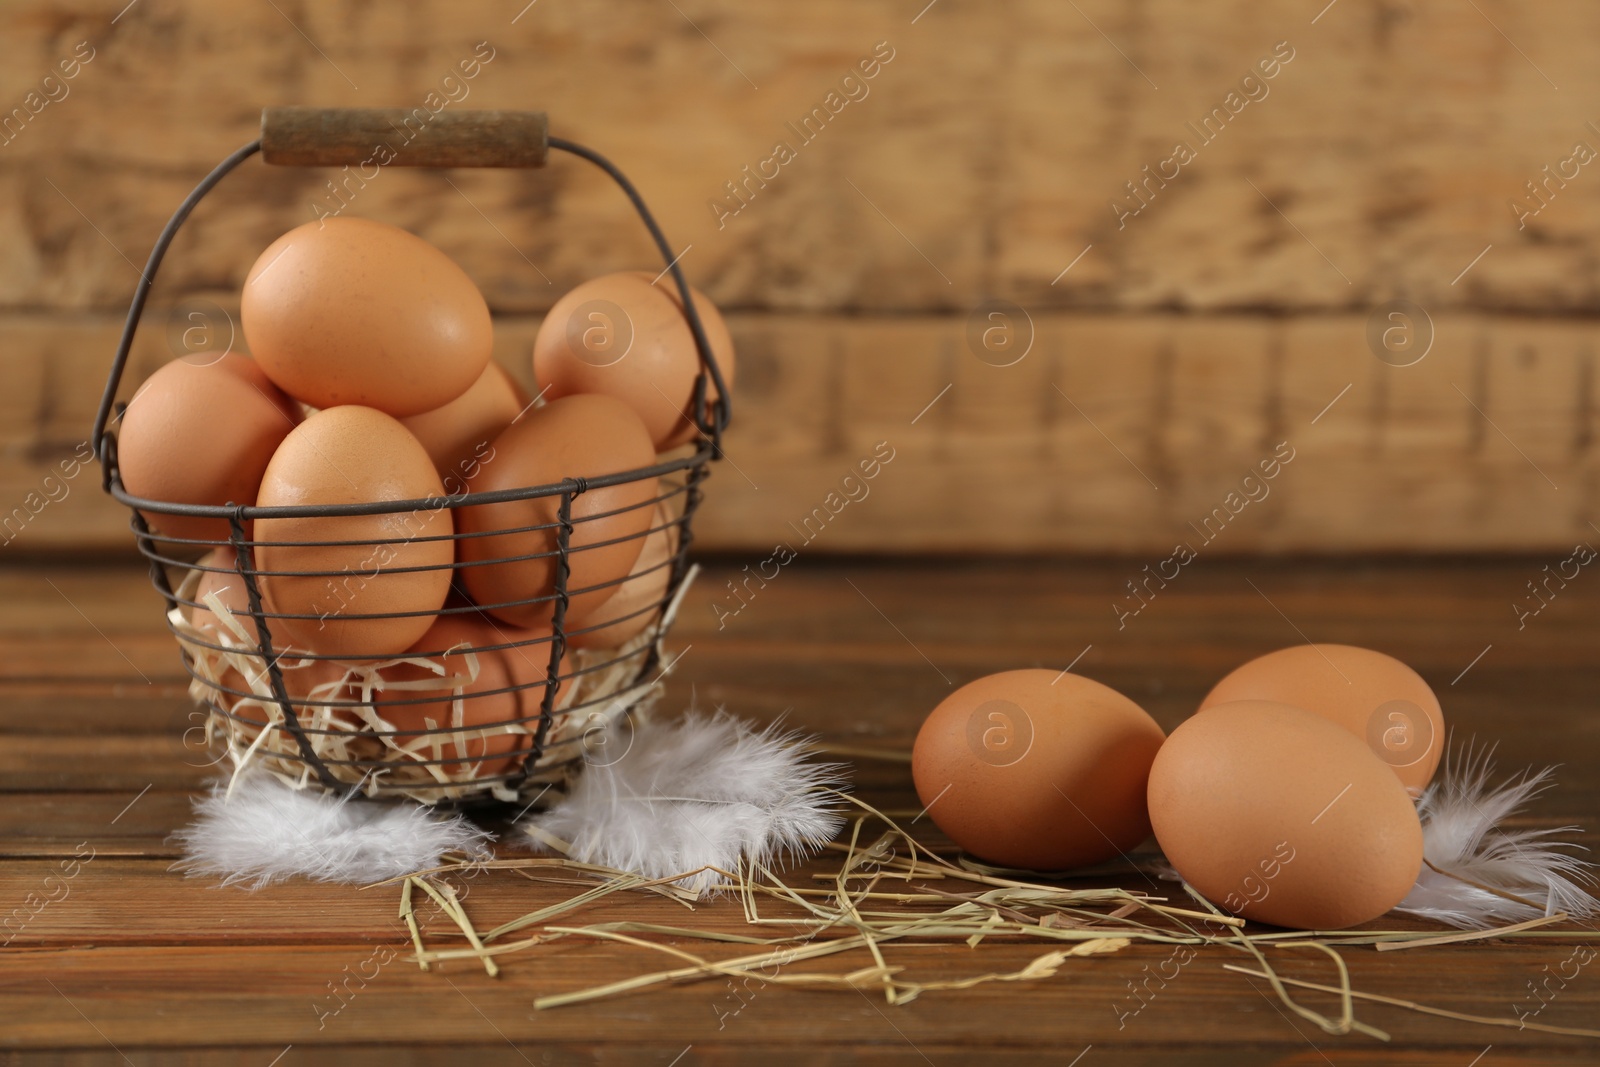 Photo of Raw chicken eggs, decorative straw and feathers on wooden table